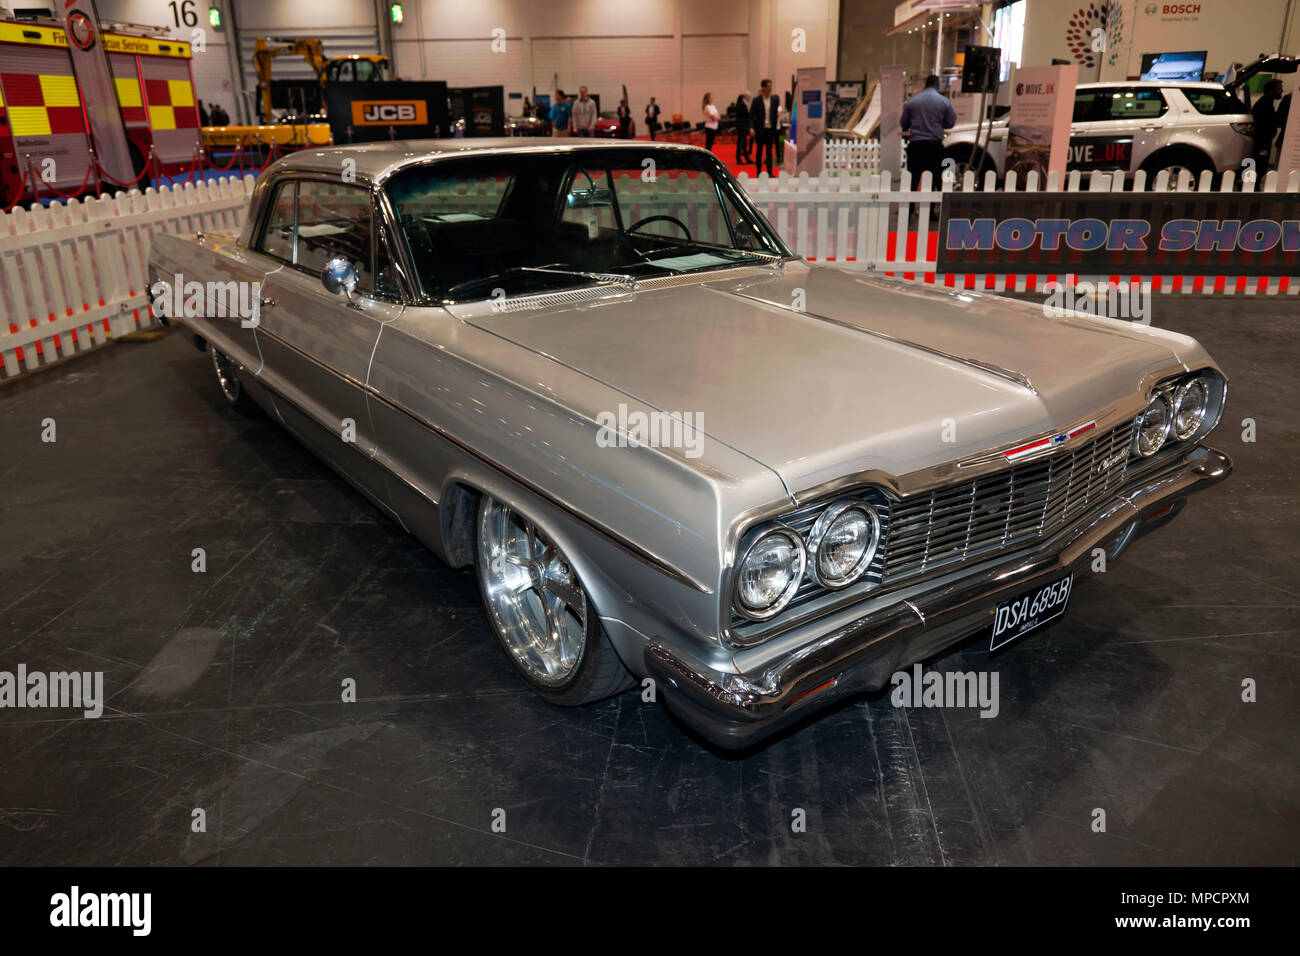 Three-quarter front view of a 1964 Silver, Chevrolet Impala, on display at the 2018 London Motor Show Stock Photo